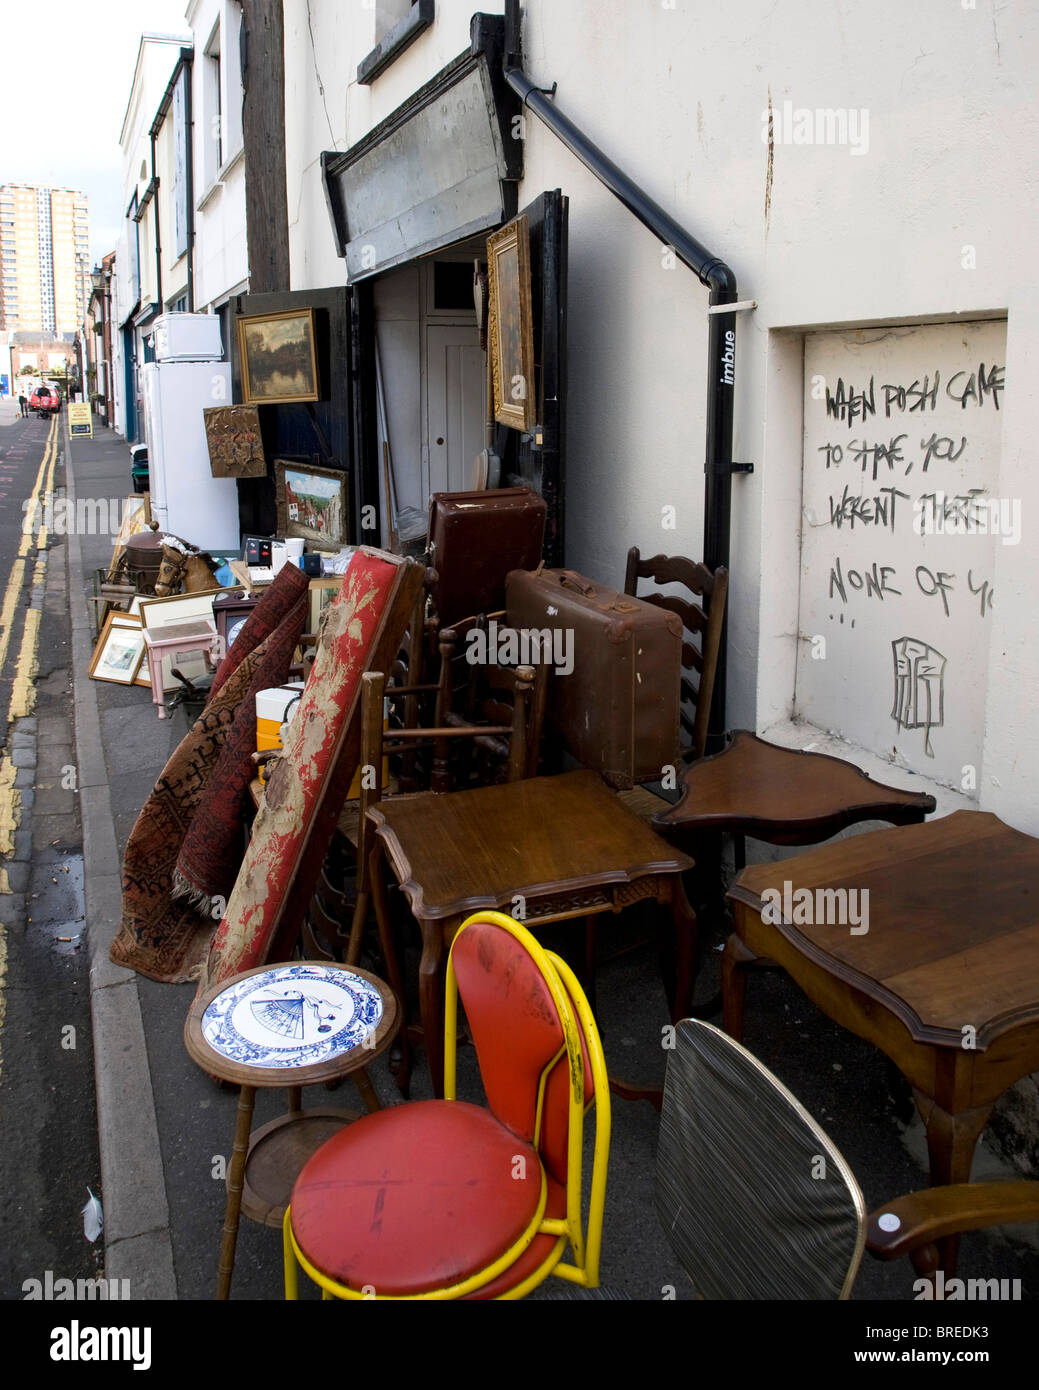 Second hand goods for sale in a Brighton Street Stock Photo